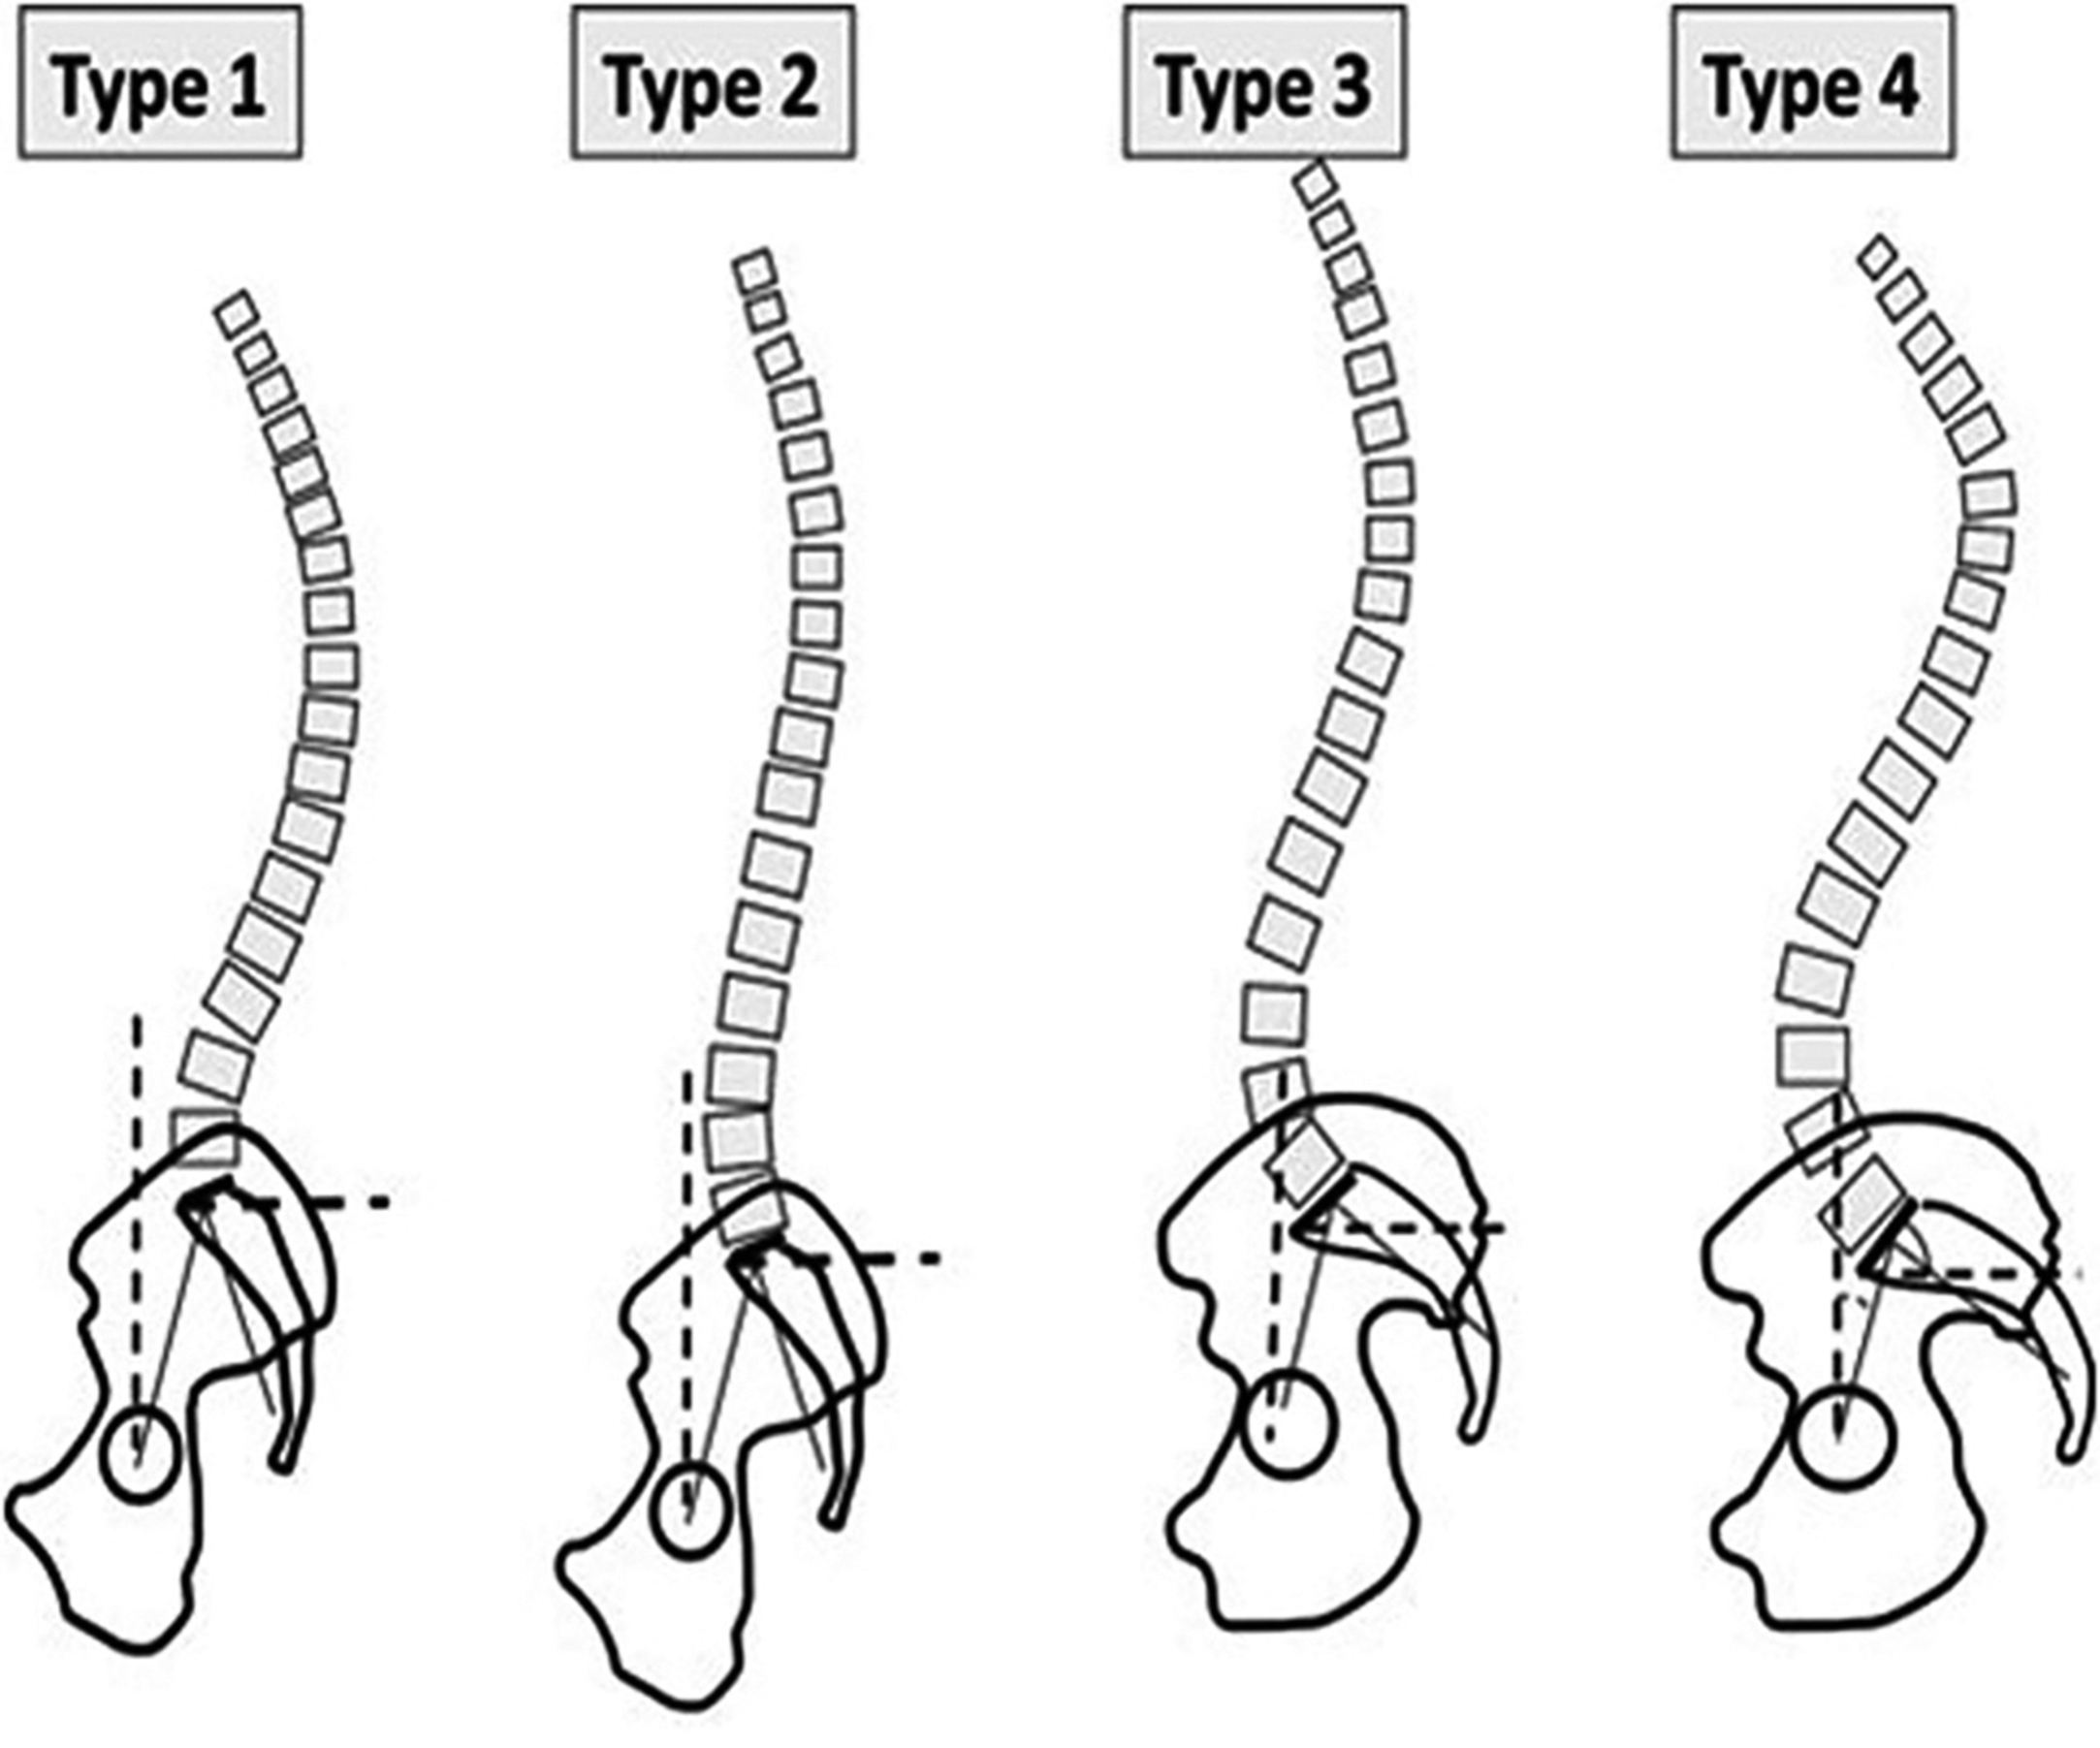 Full Length Spine—clinical Correlations With Specific Phenotypes And